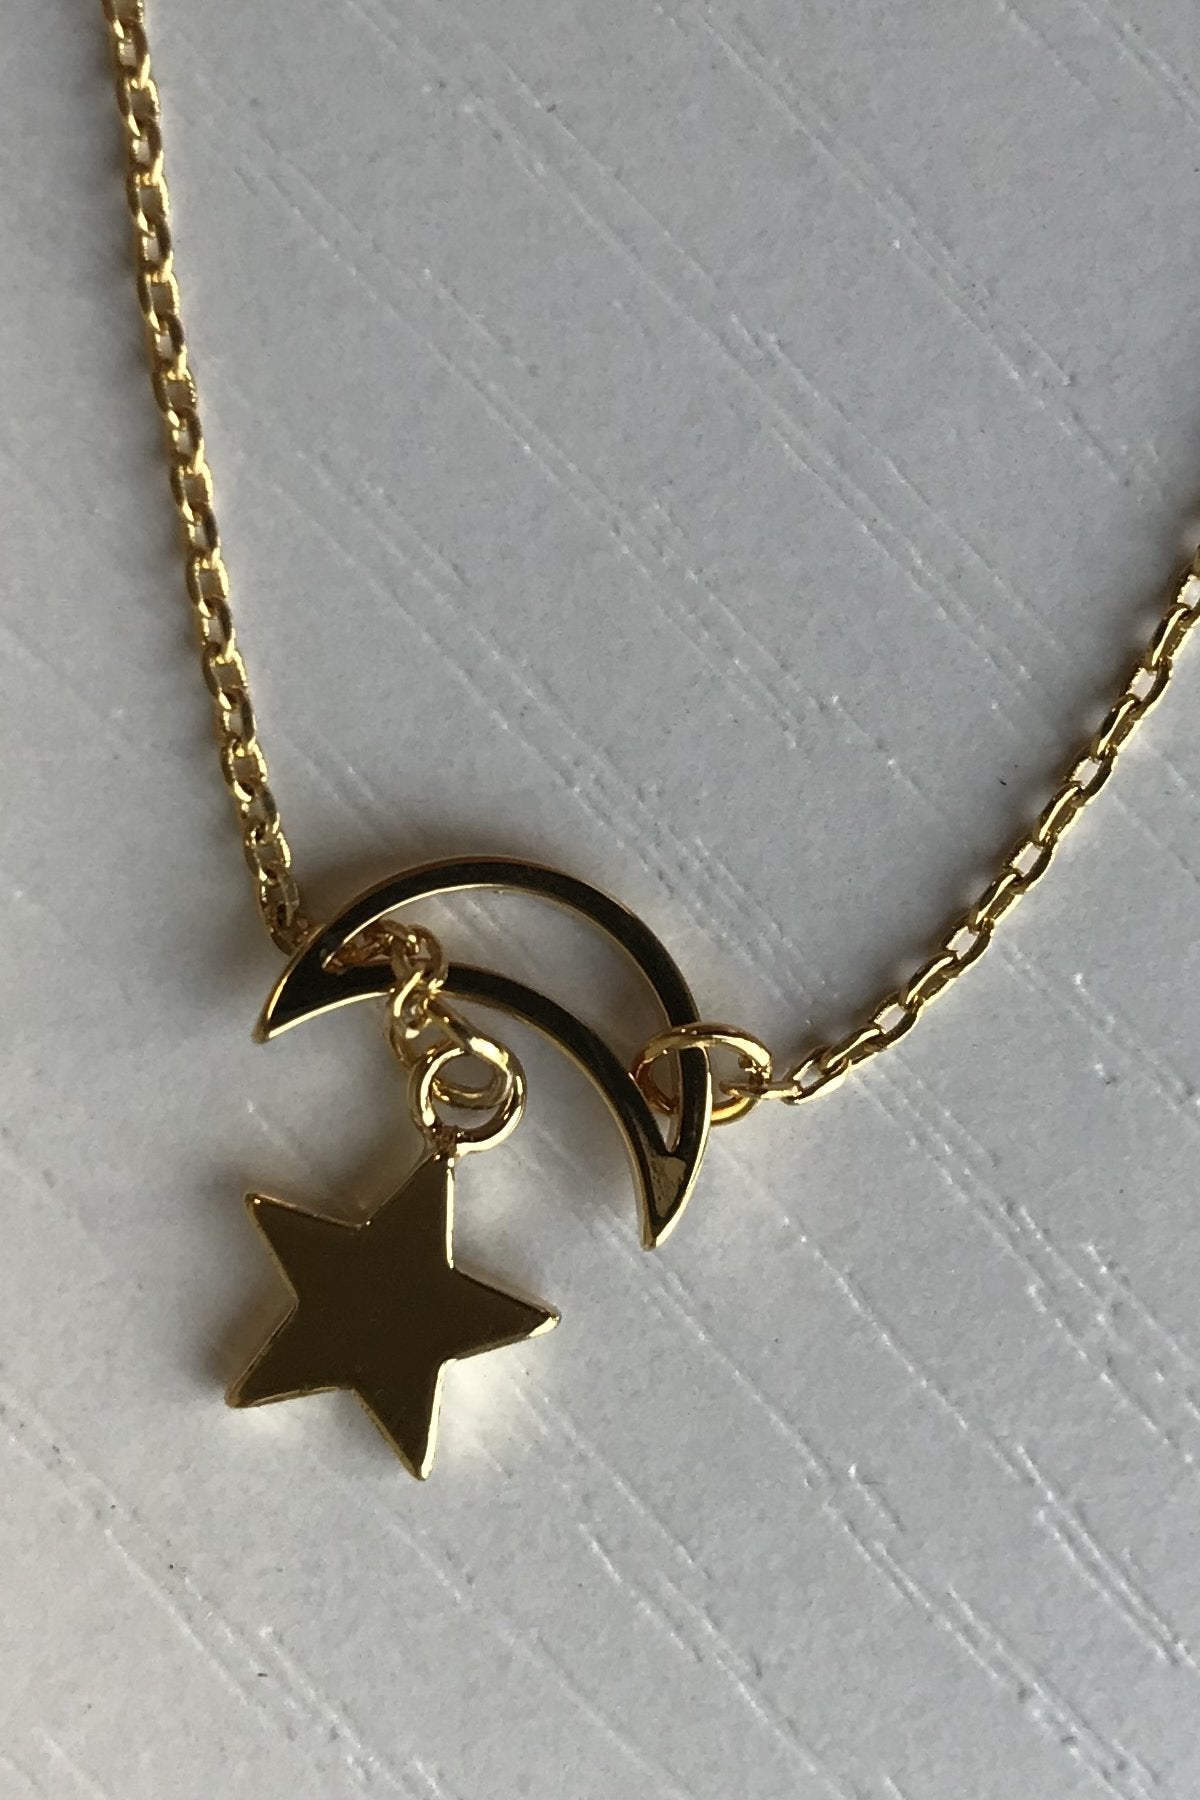 Night Sky Gold Dipped Necklace - ALL SALES FINAL